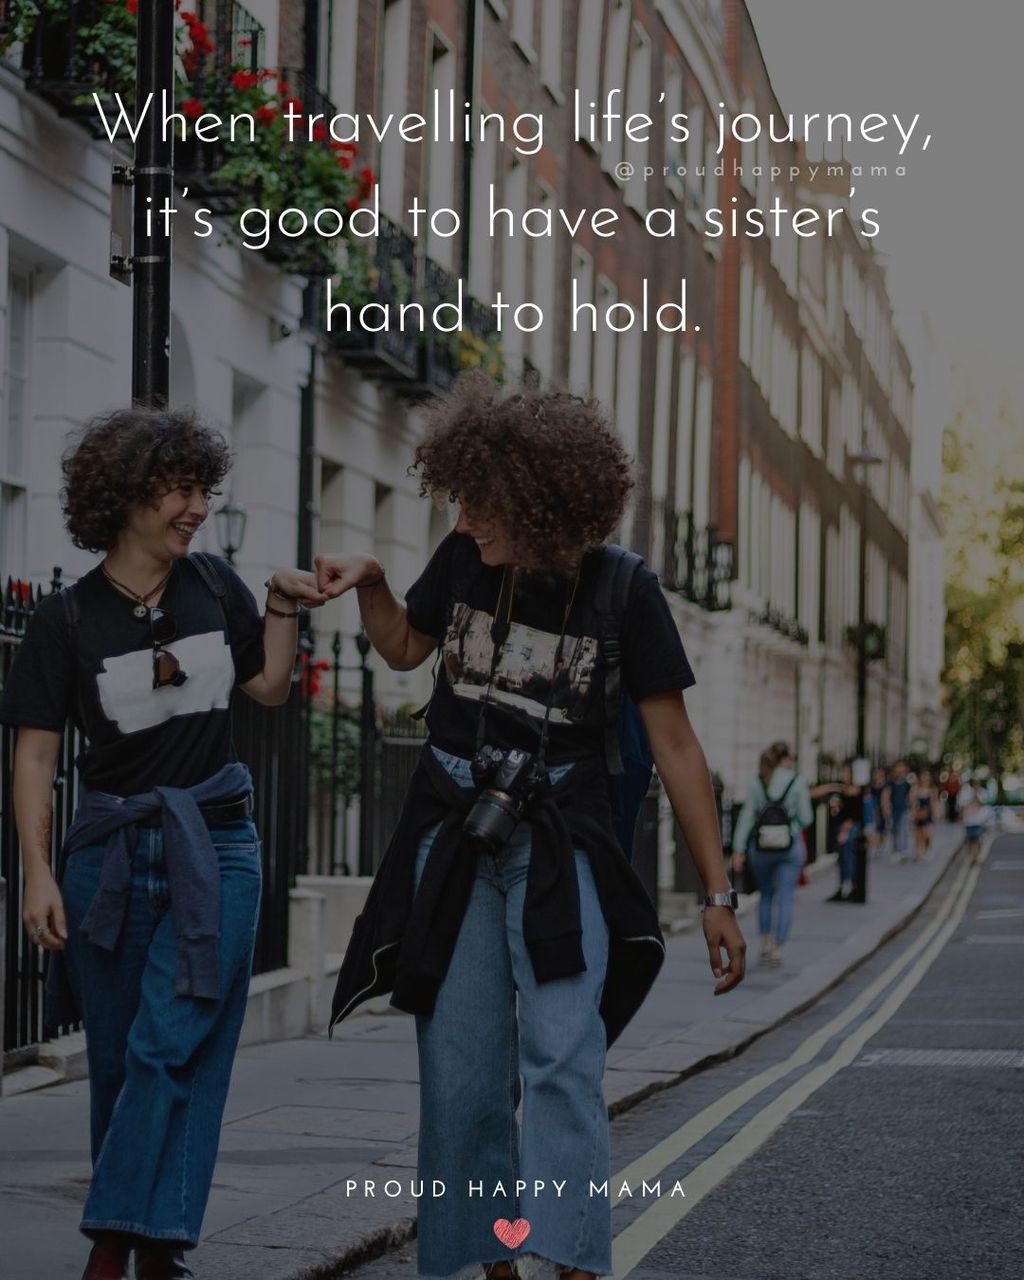 Sister Quotes - When travelling lifes journey, its good to have a sisters hand to hold.